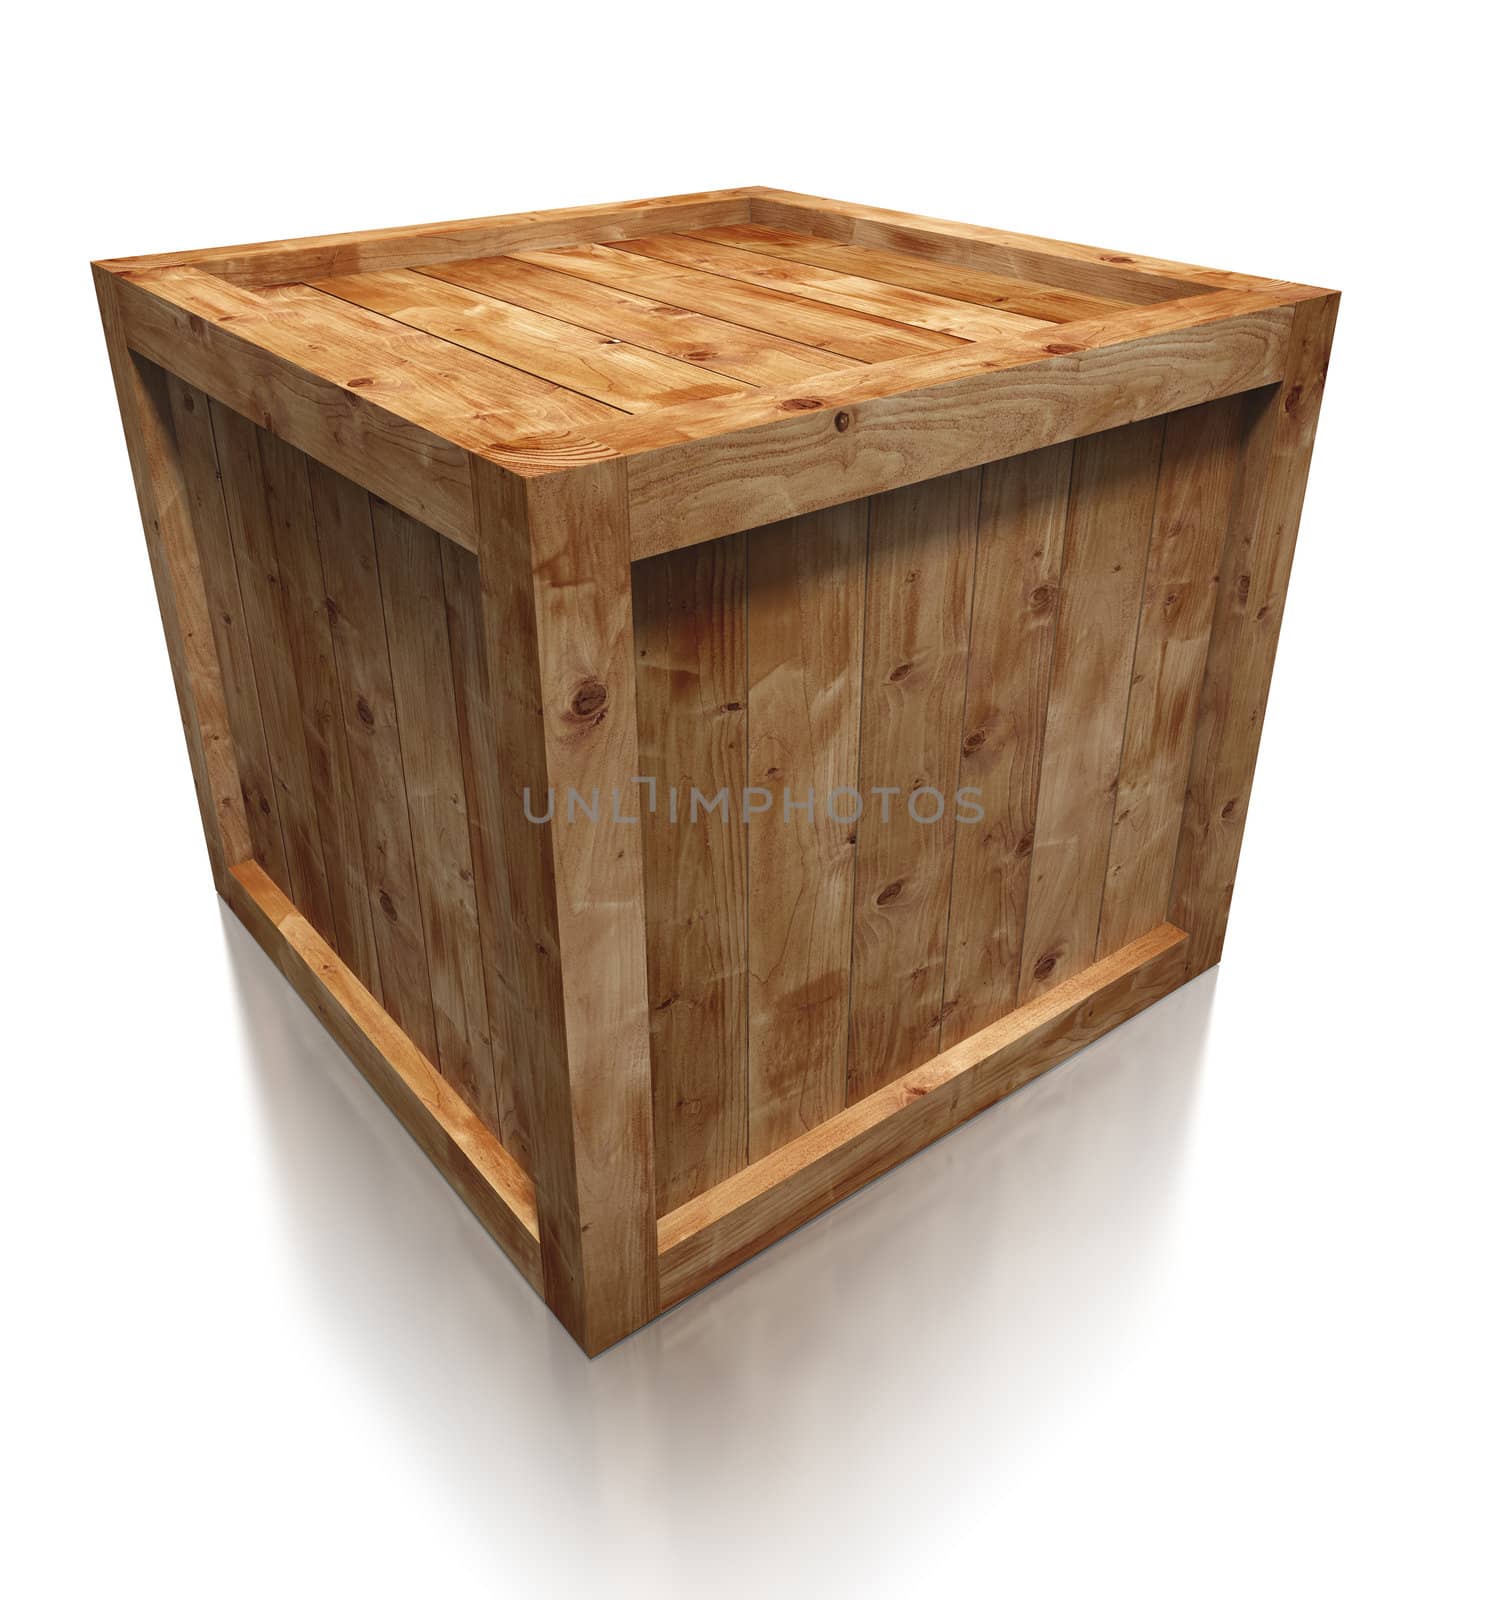 wooden box crate on white background. clipping path included